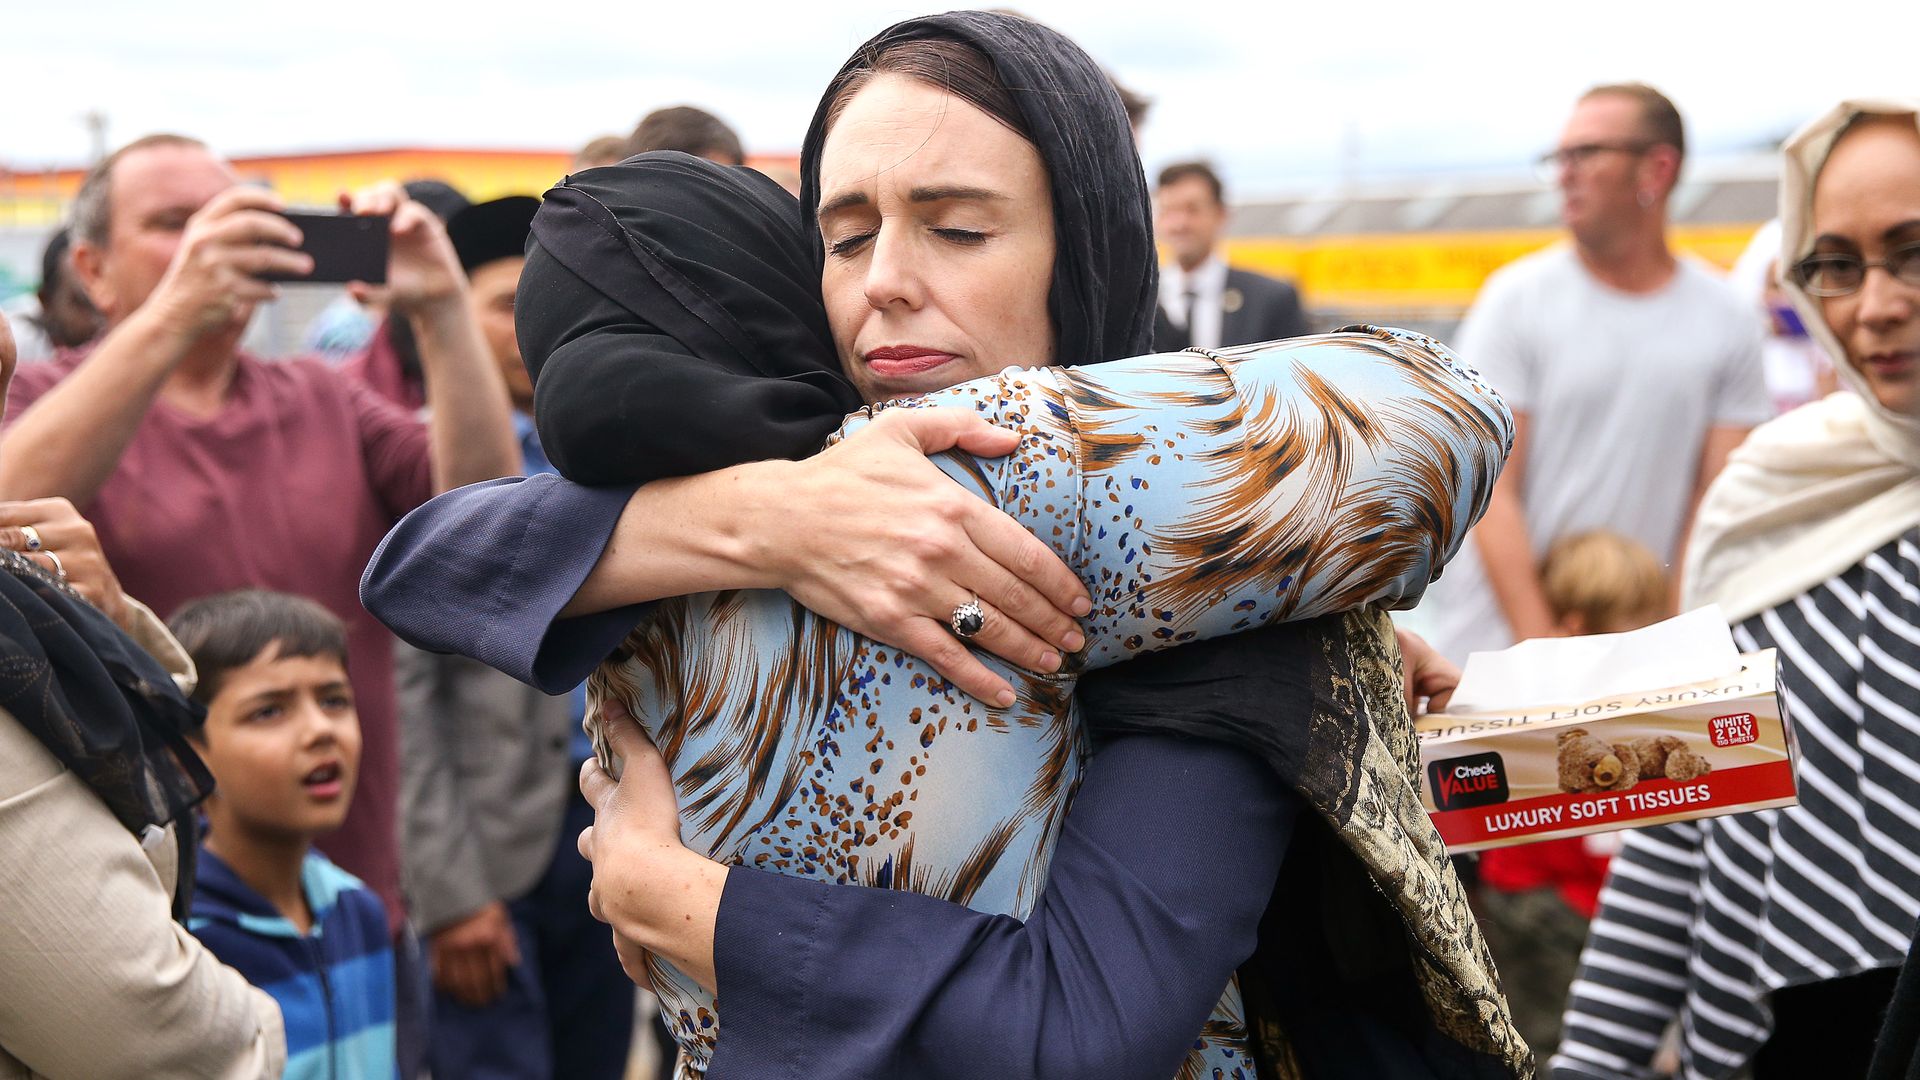 New Zealand Prime Minister Jacinda Ardern has won praise around the world for her leadership and compassion.